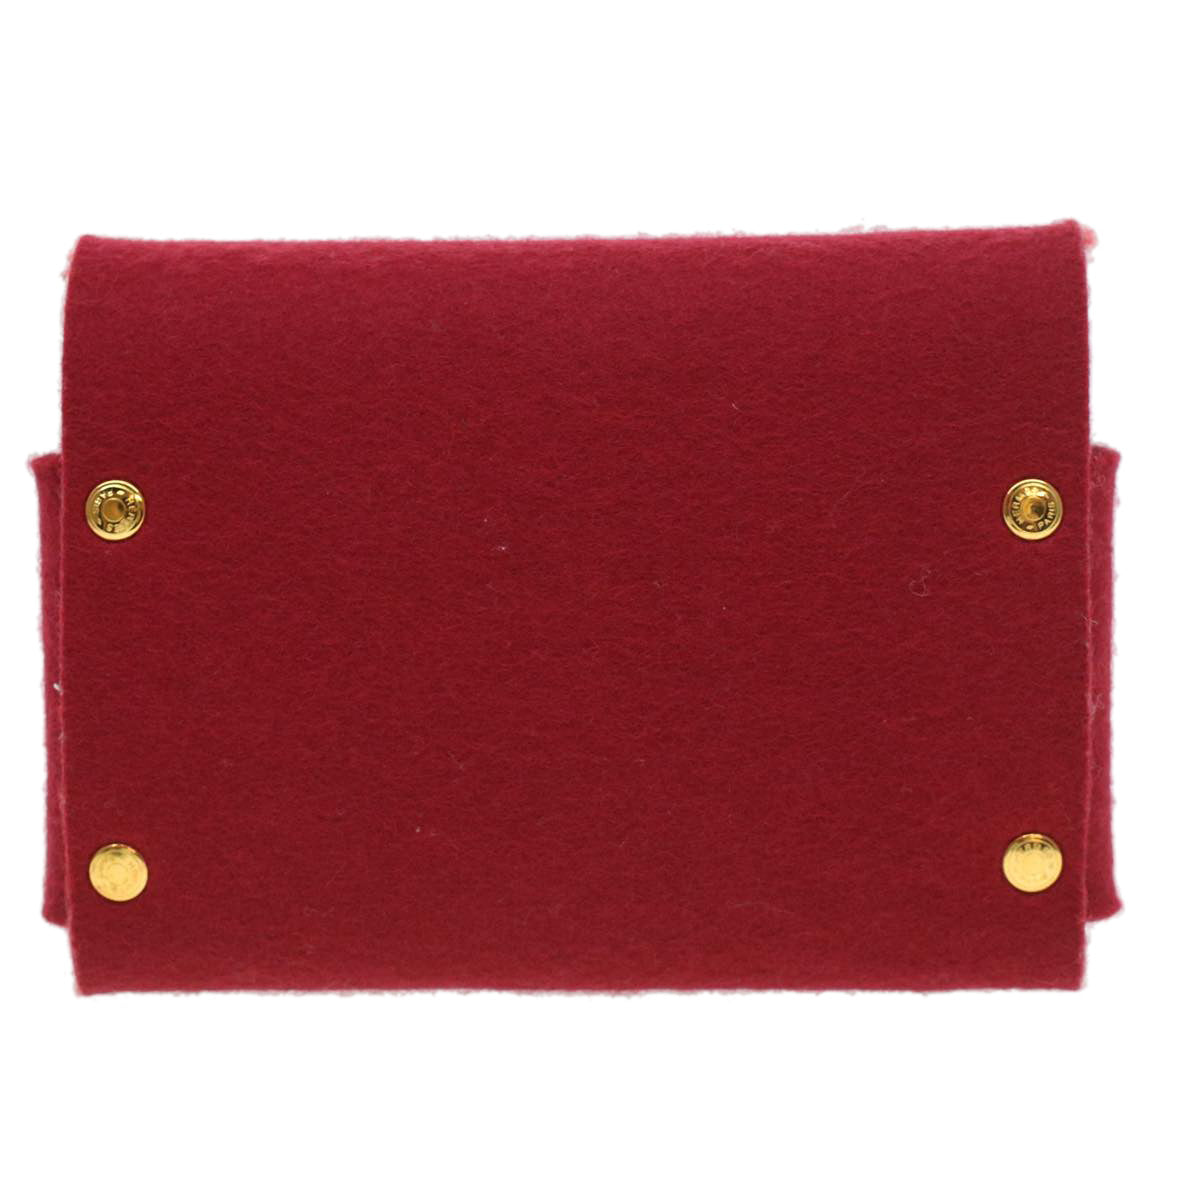 HERMES EtuiCartesGM Card Case Wool Red Auth ar8170 - 0